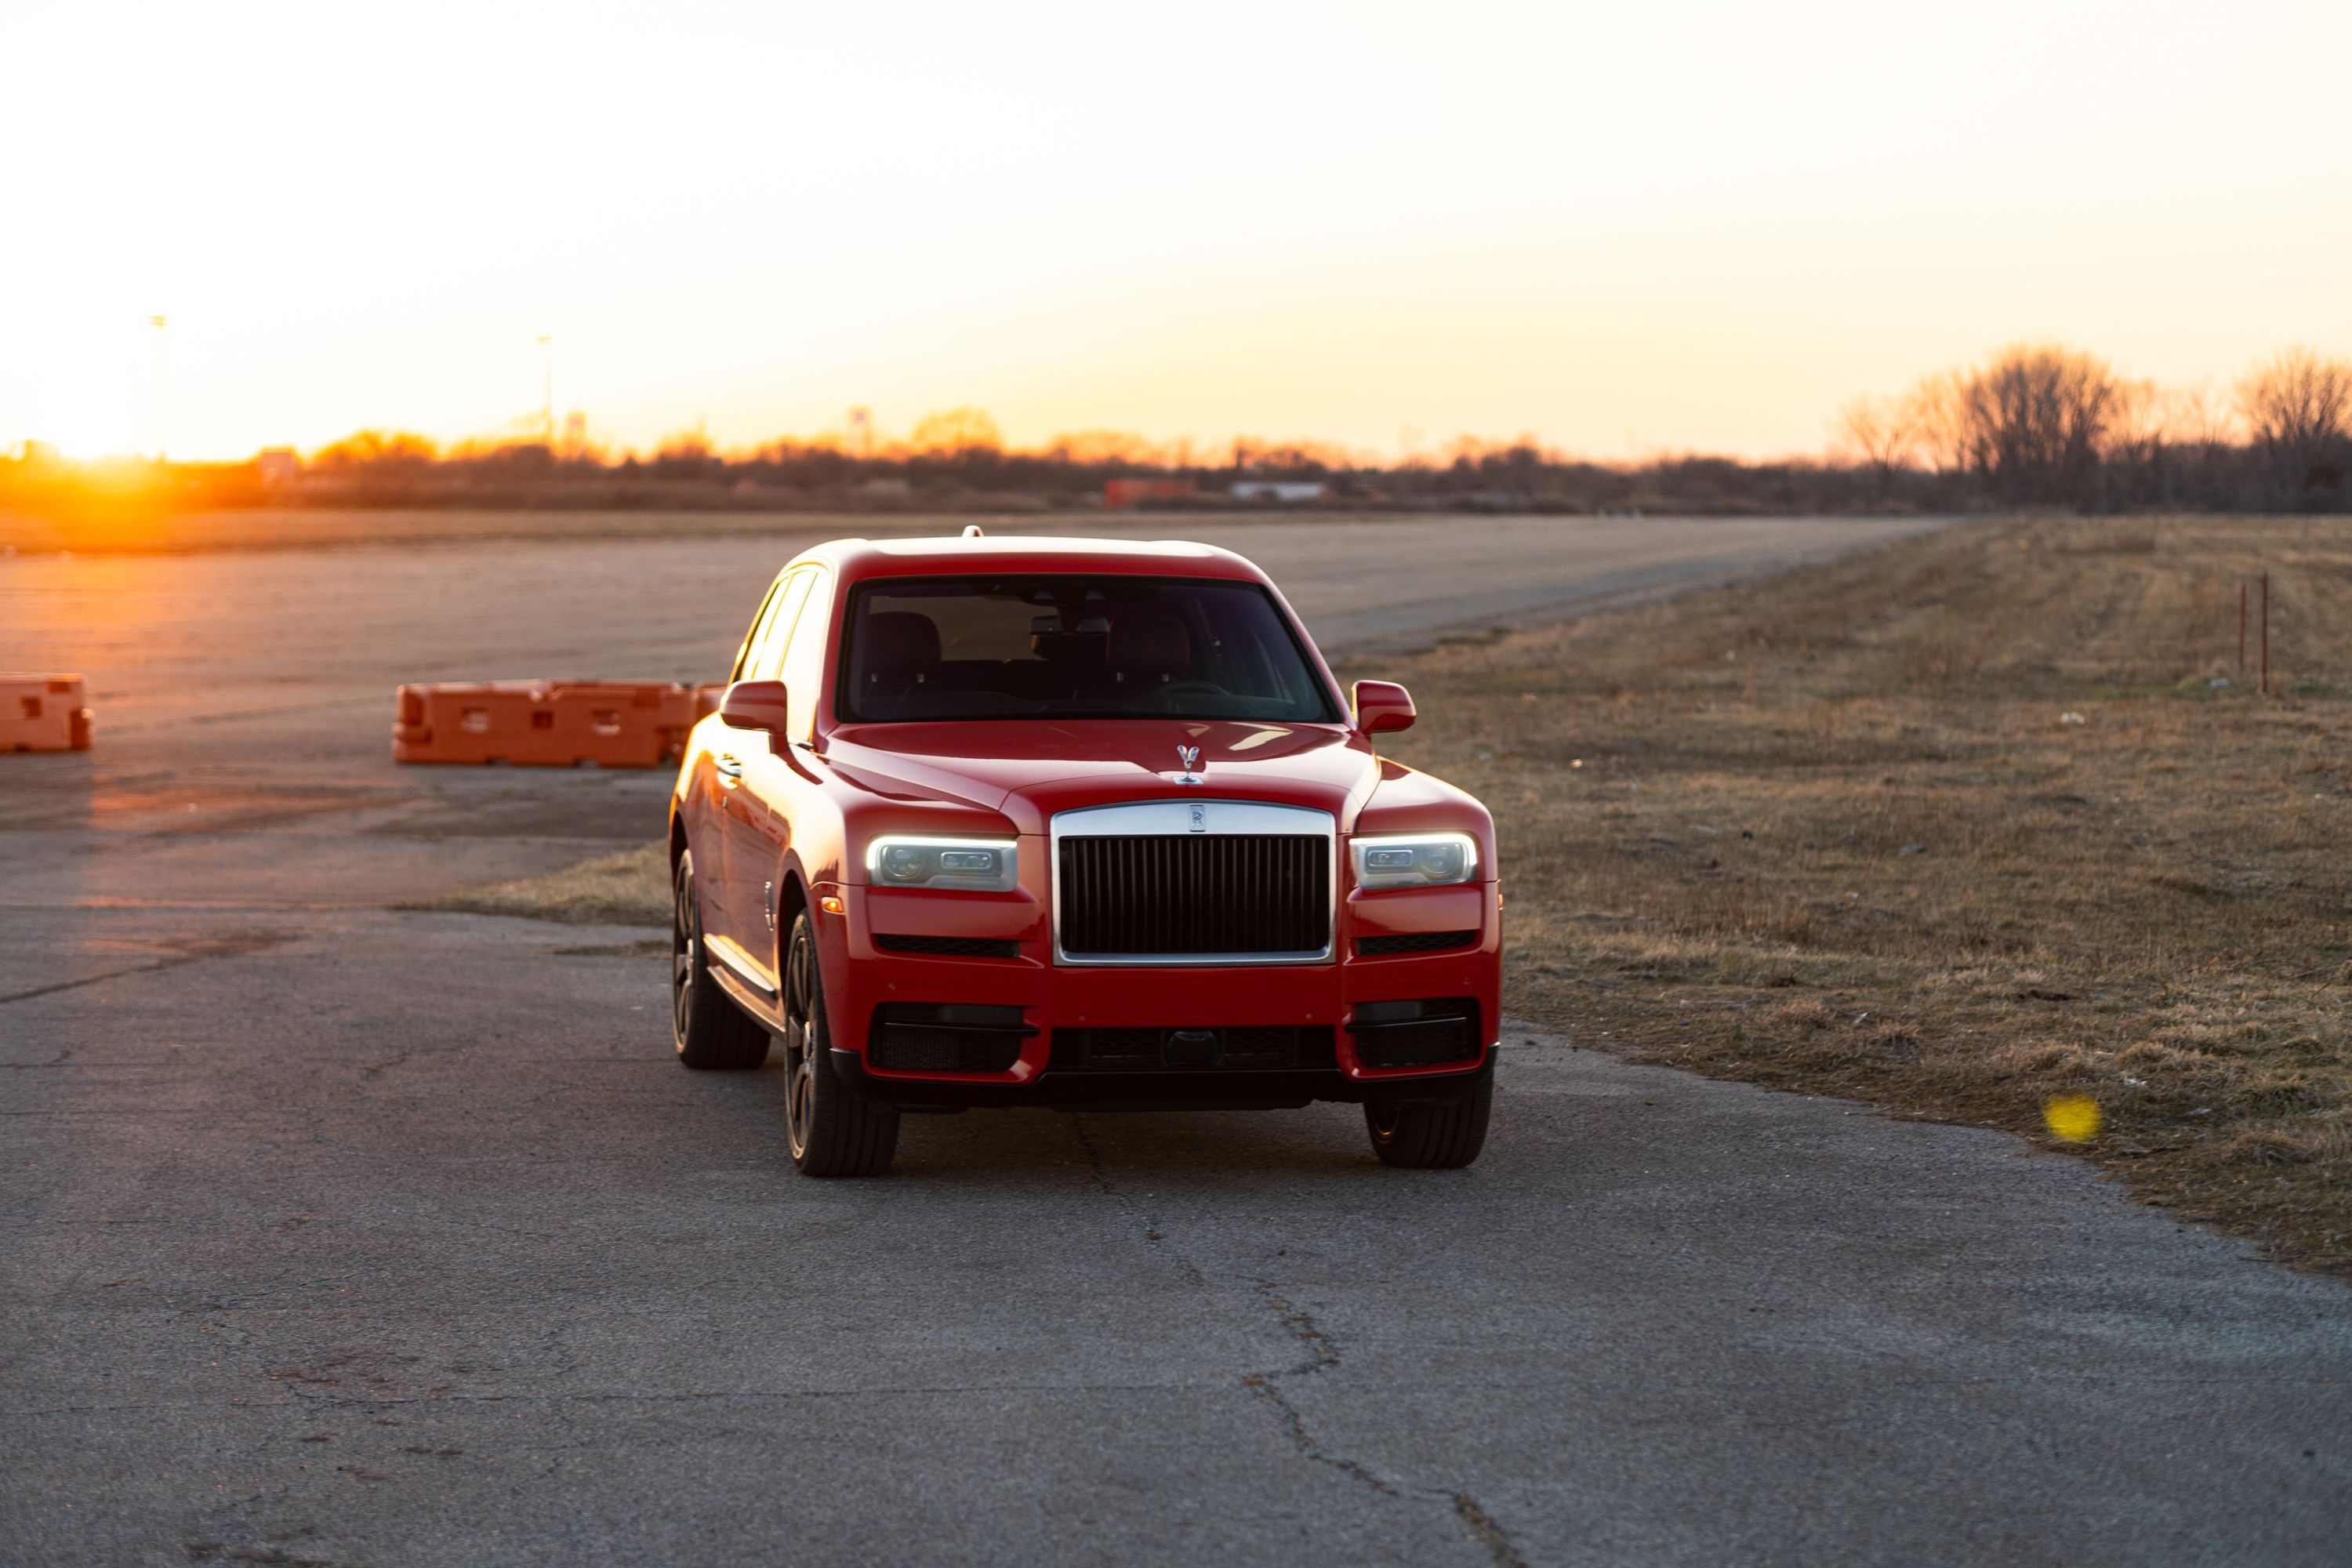 What the $417,800 Rolls-Royce Cullinan Teaches About Yourself